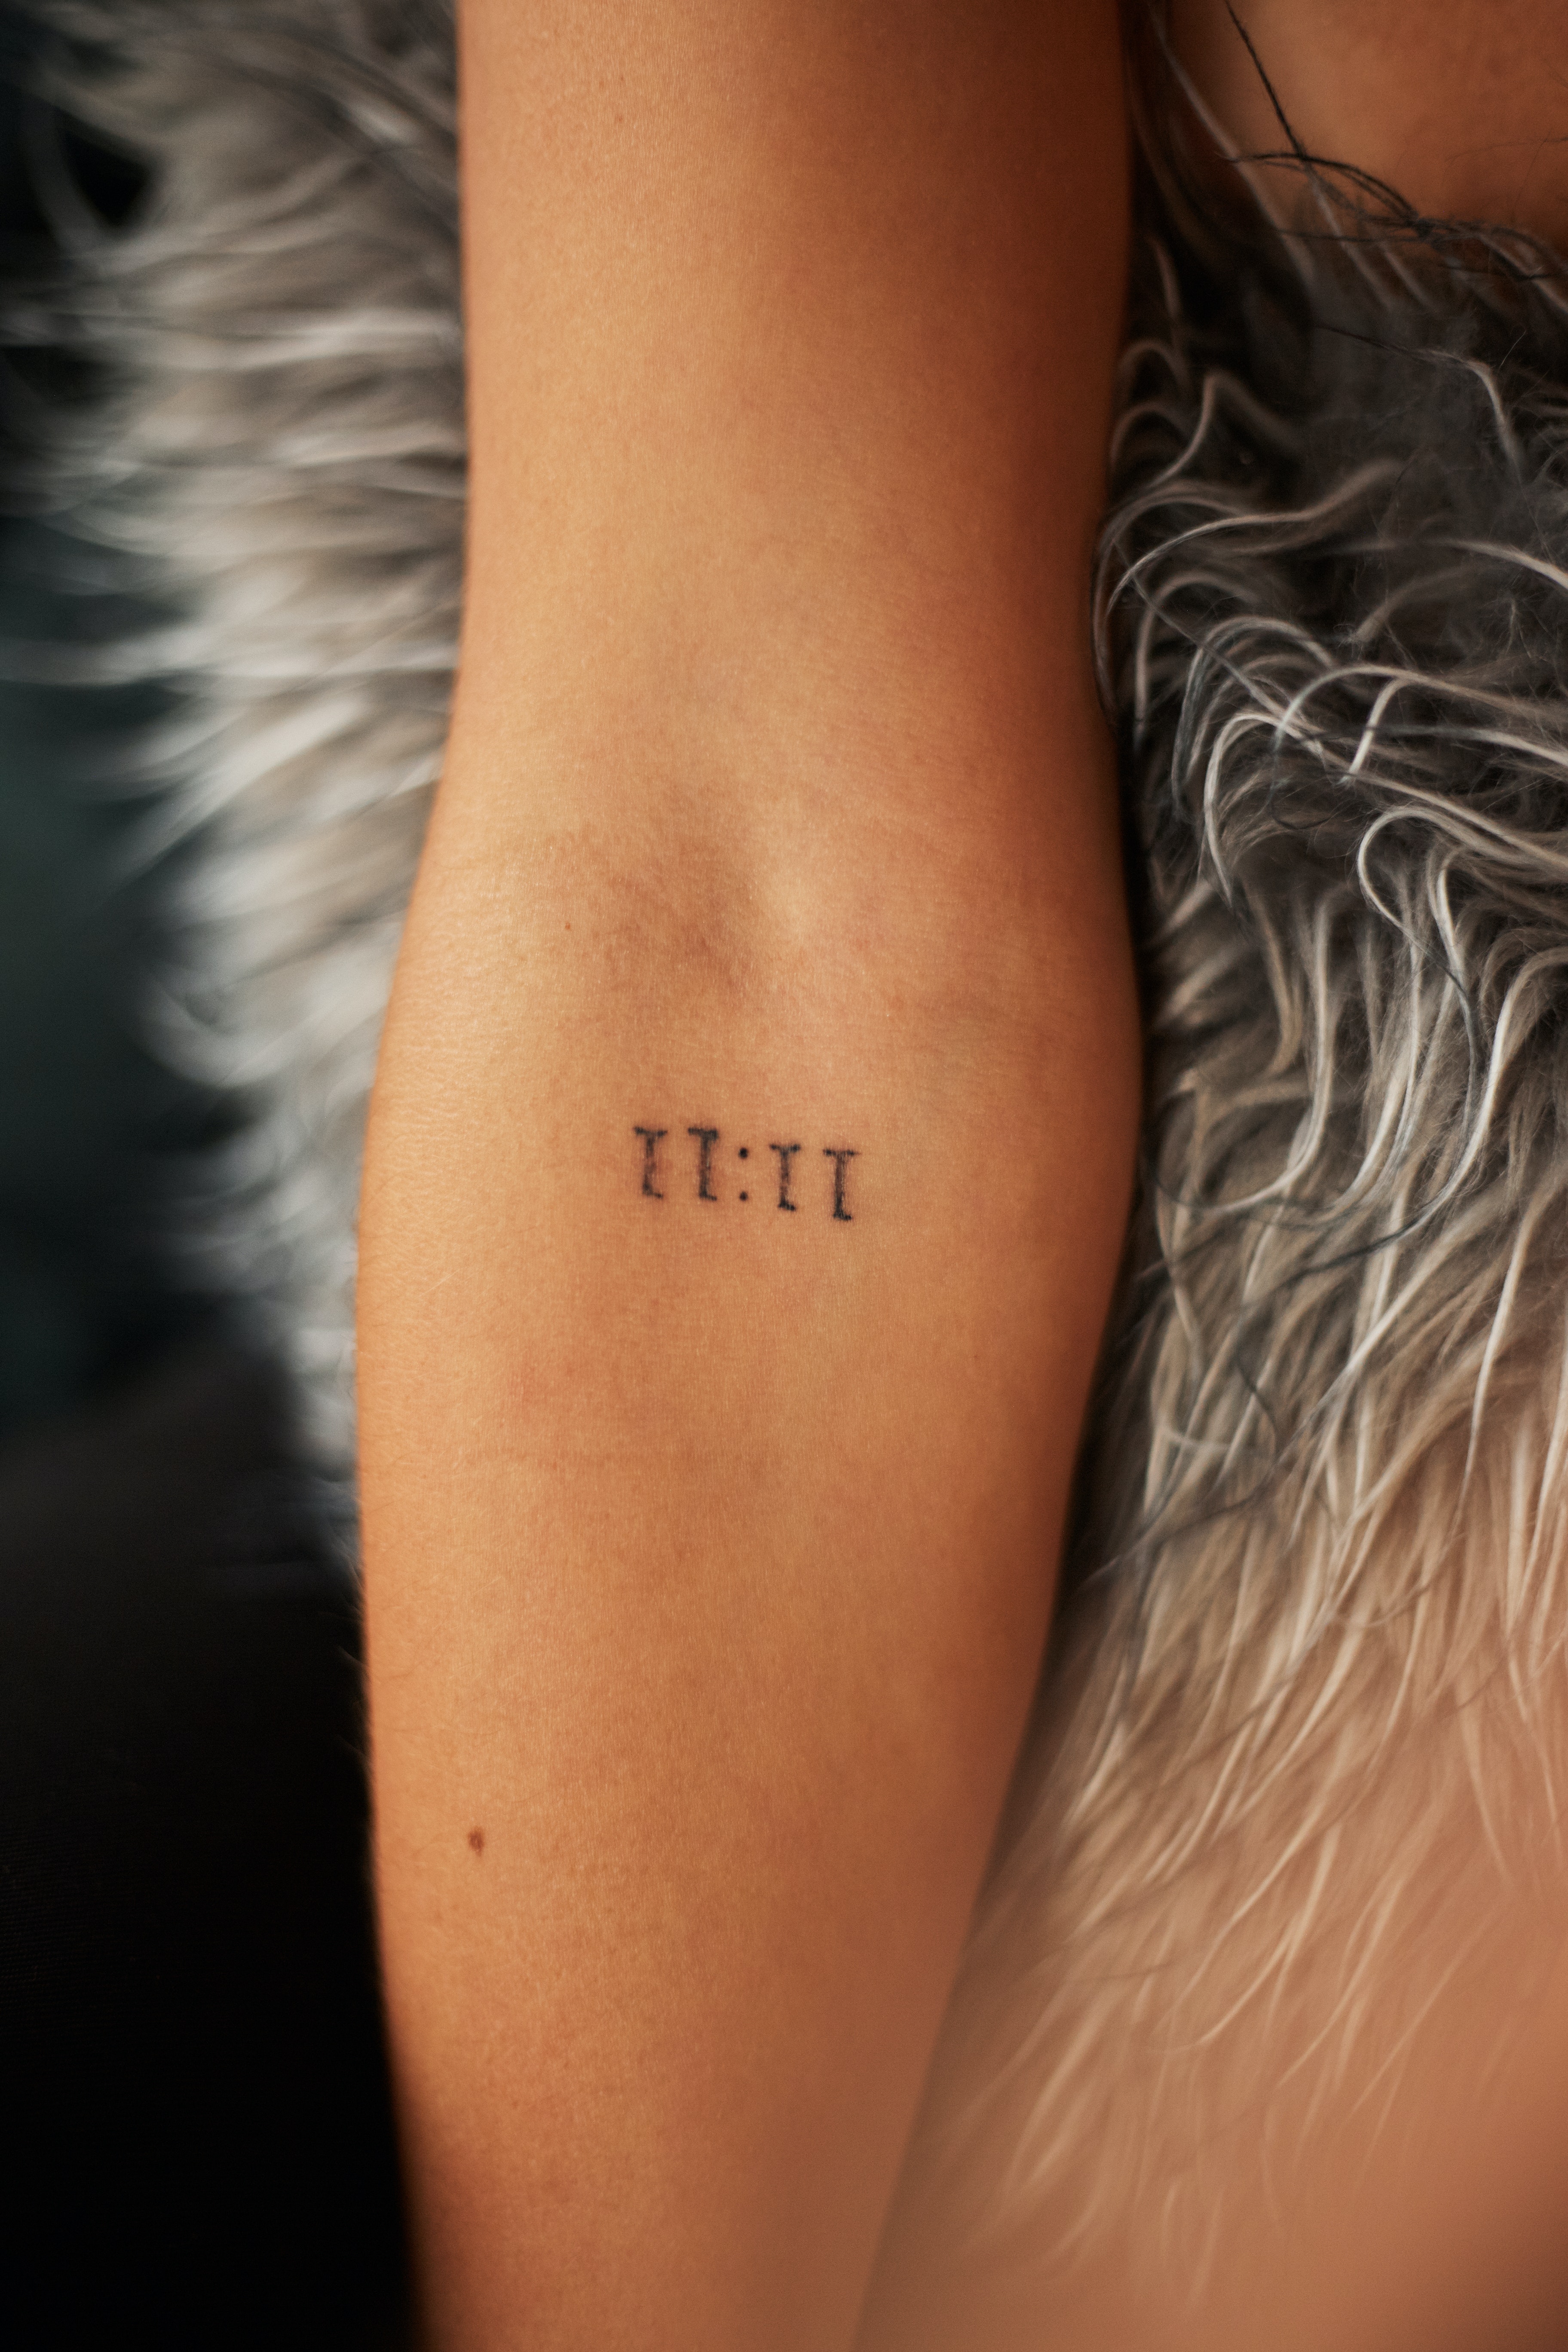 Small Tattoo - Simple Tattoos With sophisticated Meaning (Small Tattoos  With Meaning) | Facebook